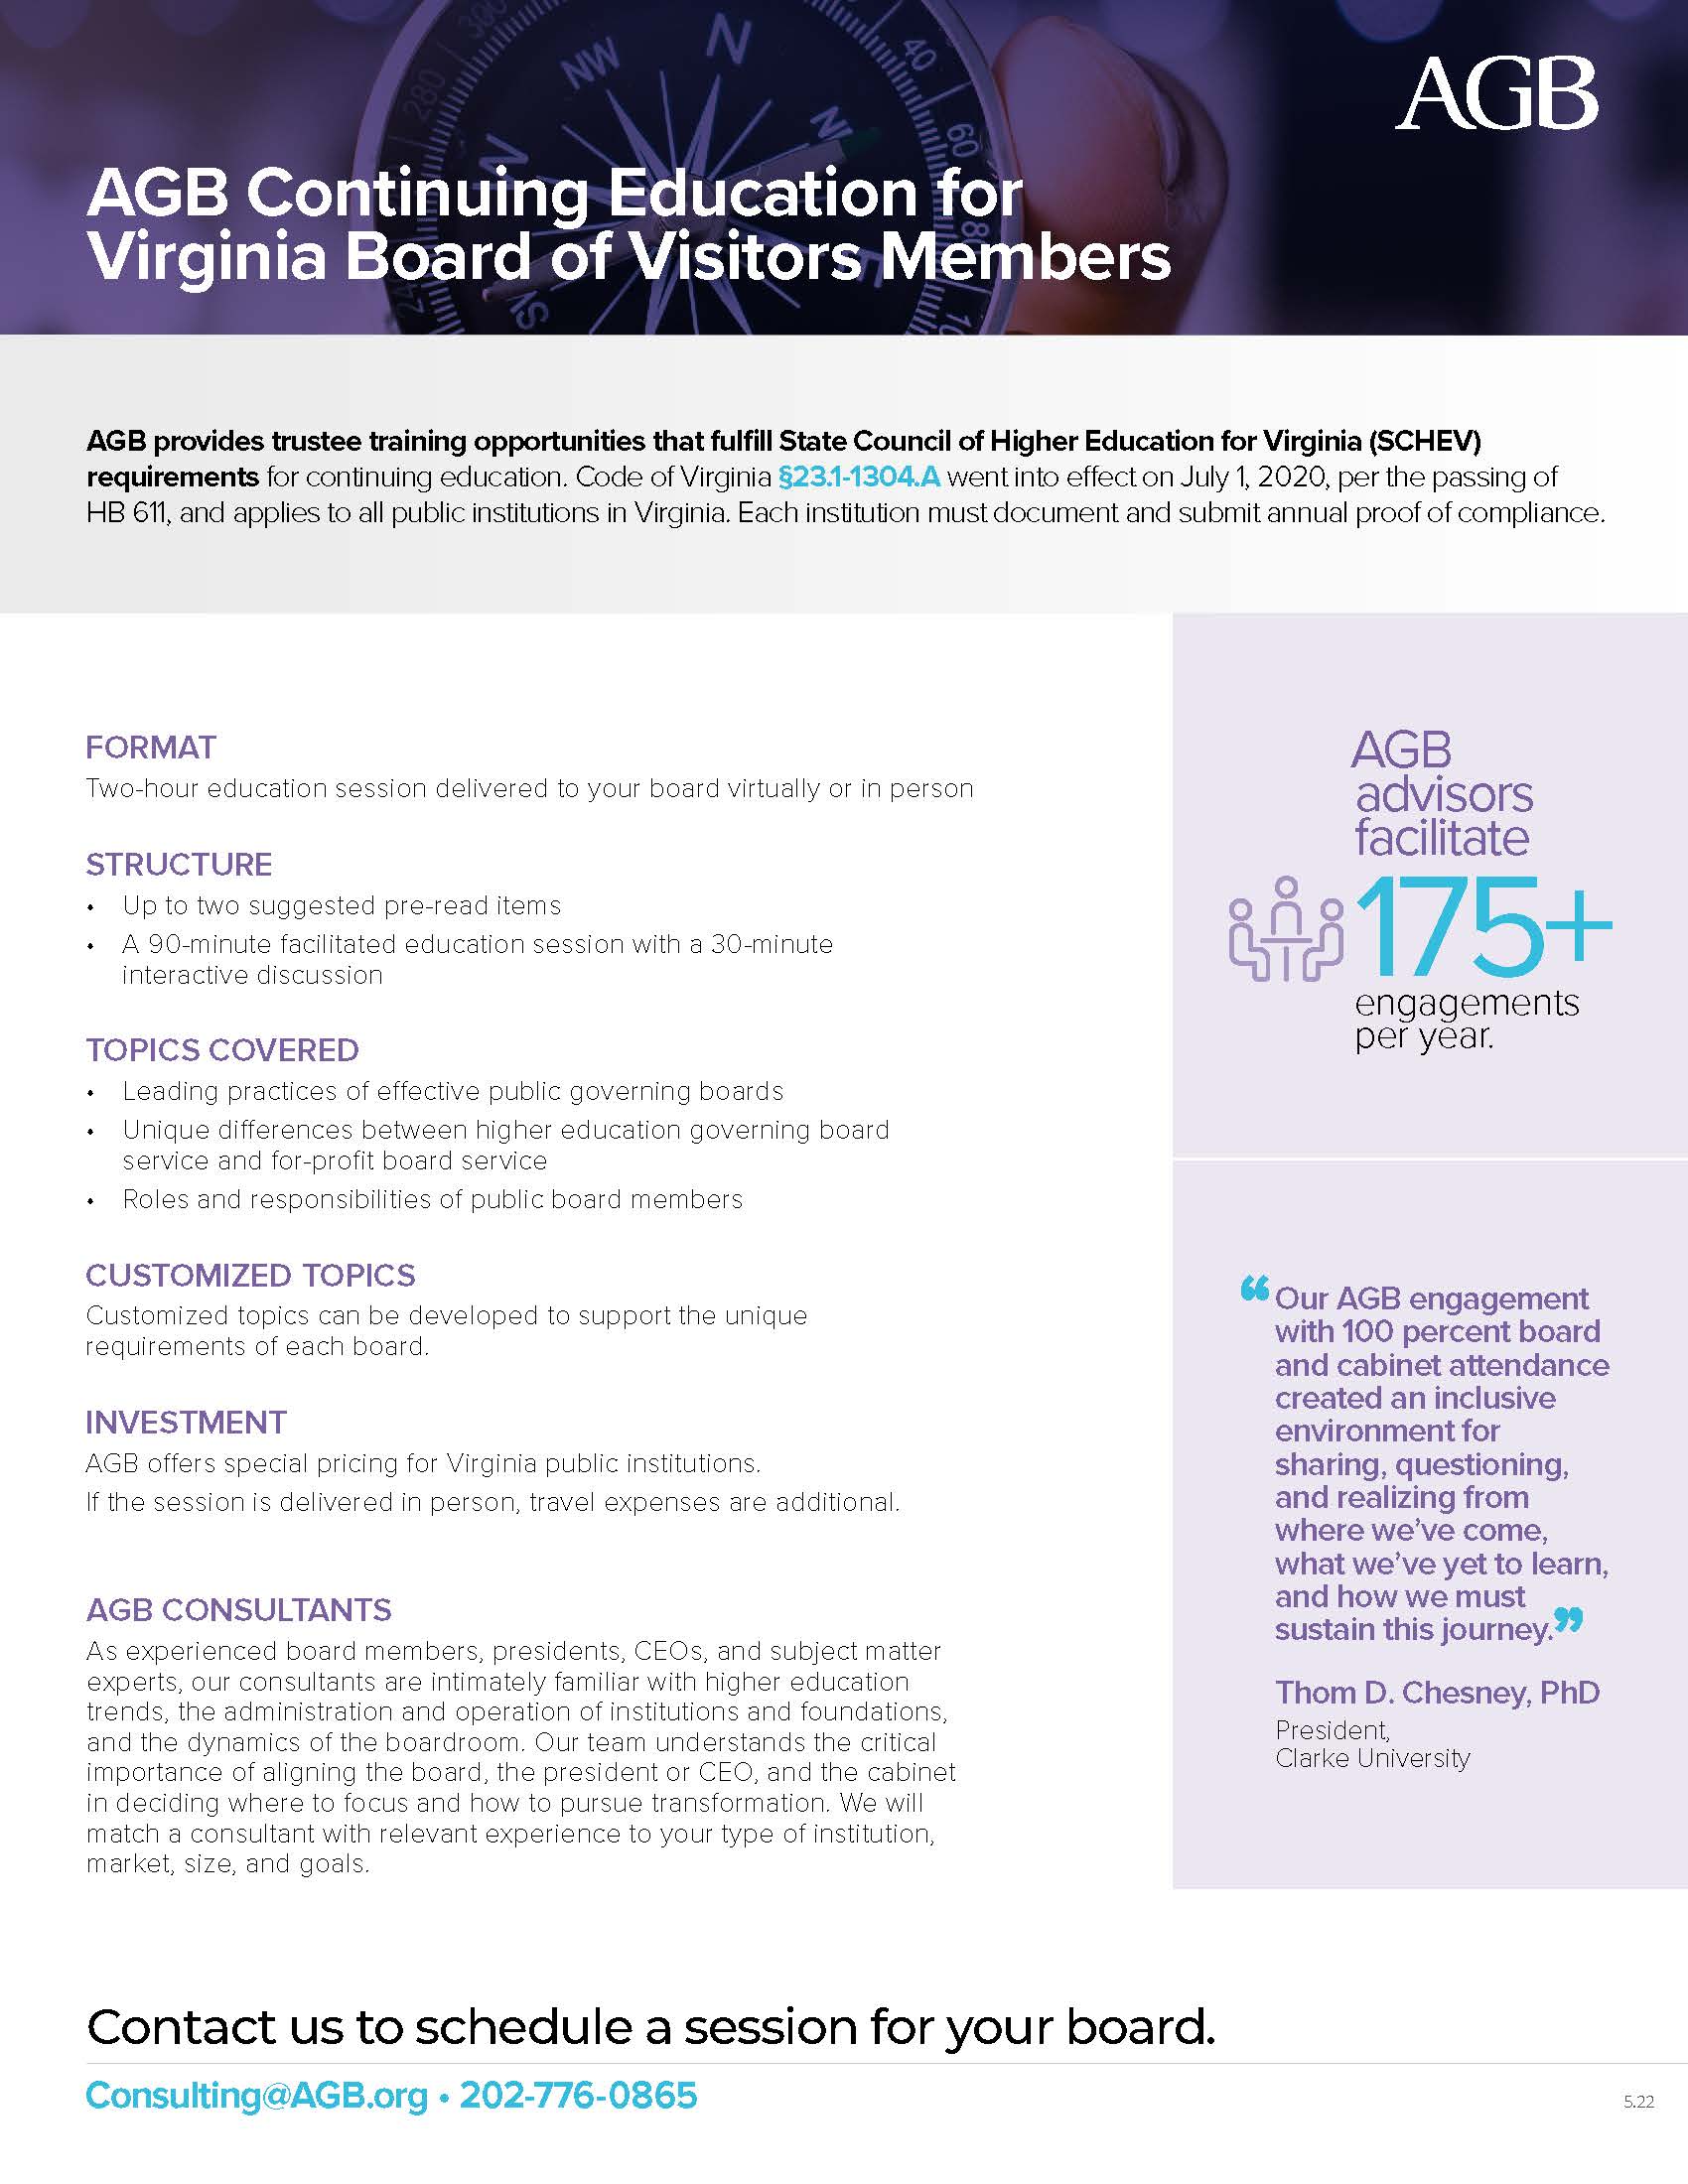 AGB Consulting - Continuing Education for Virginia Board of Visitors Members overview